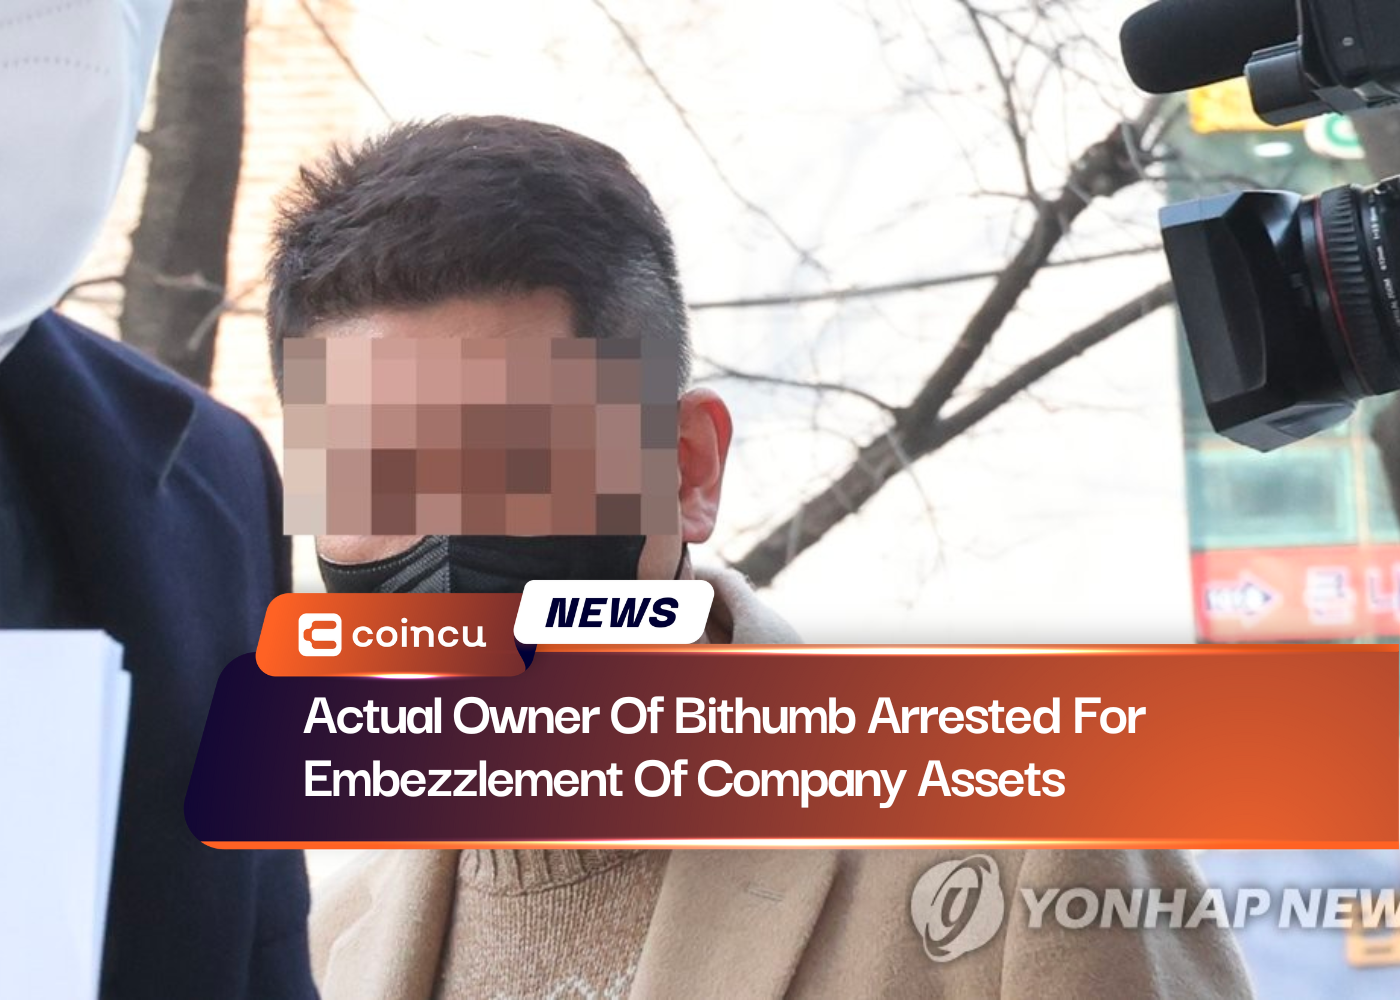 Bithumb's True Owner Arrested For Embezzlement Of Company Assets